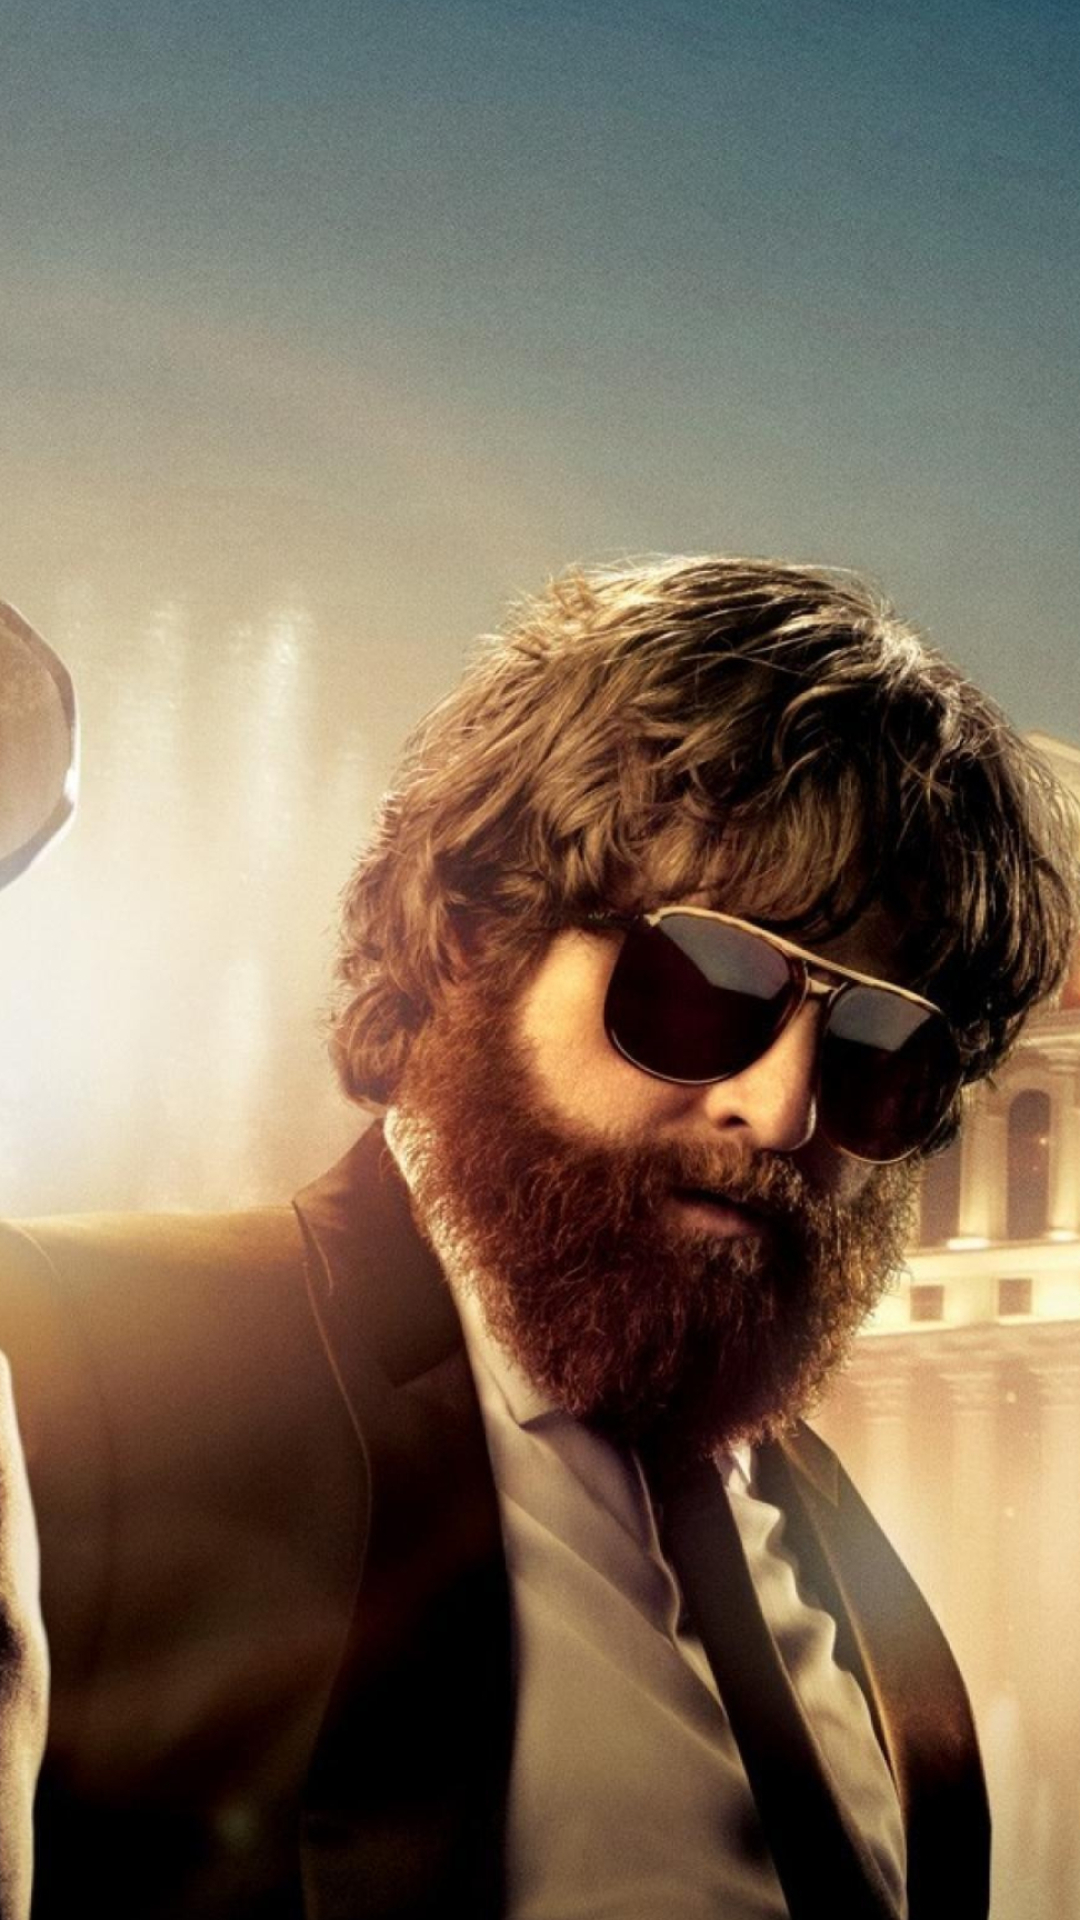 Zach Galifianakis, Hangover Alan wallpapers, Samantha Simpson, Funny images, 1080x1920 Full HD Phone